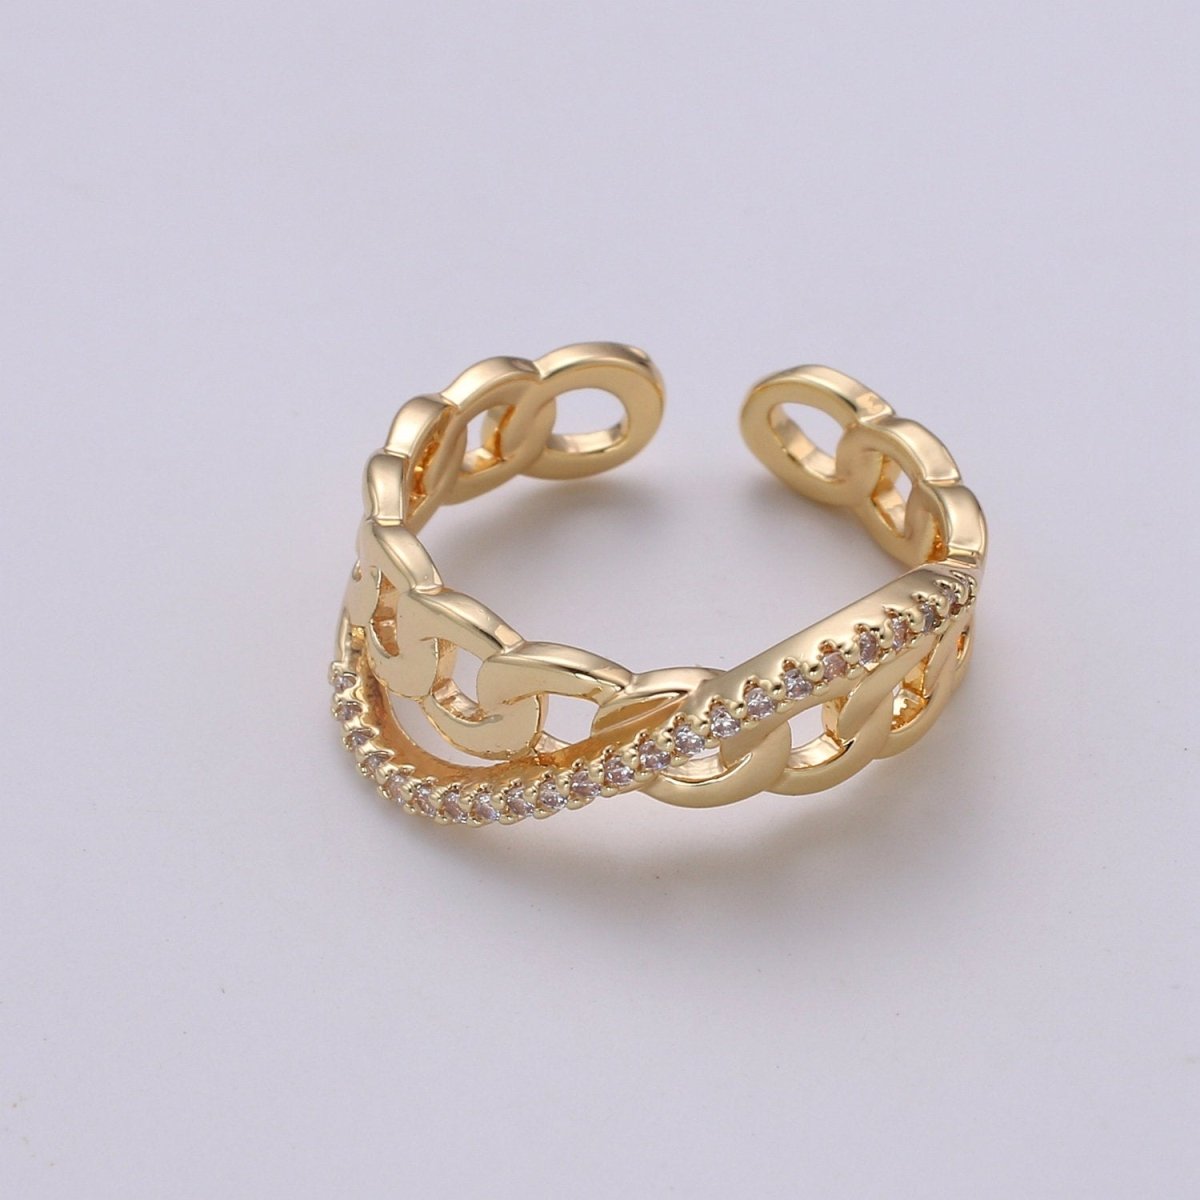 Cz Chain Ring - Curb Chain Ring - Gold Ring - Stackable Rings - Minimalist Ring - Twist Chain Ring - Statement Ring - Layering Ring R-152 - DLUXCA